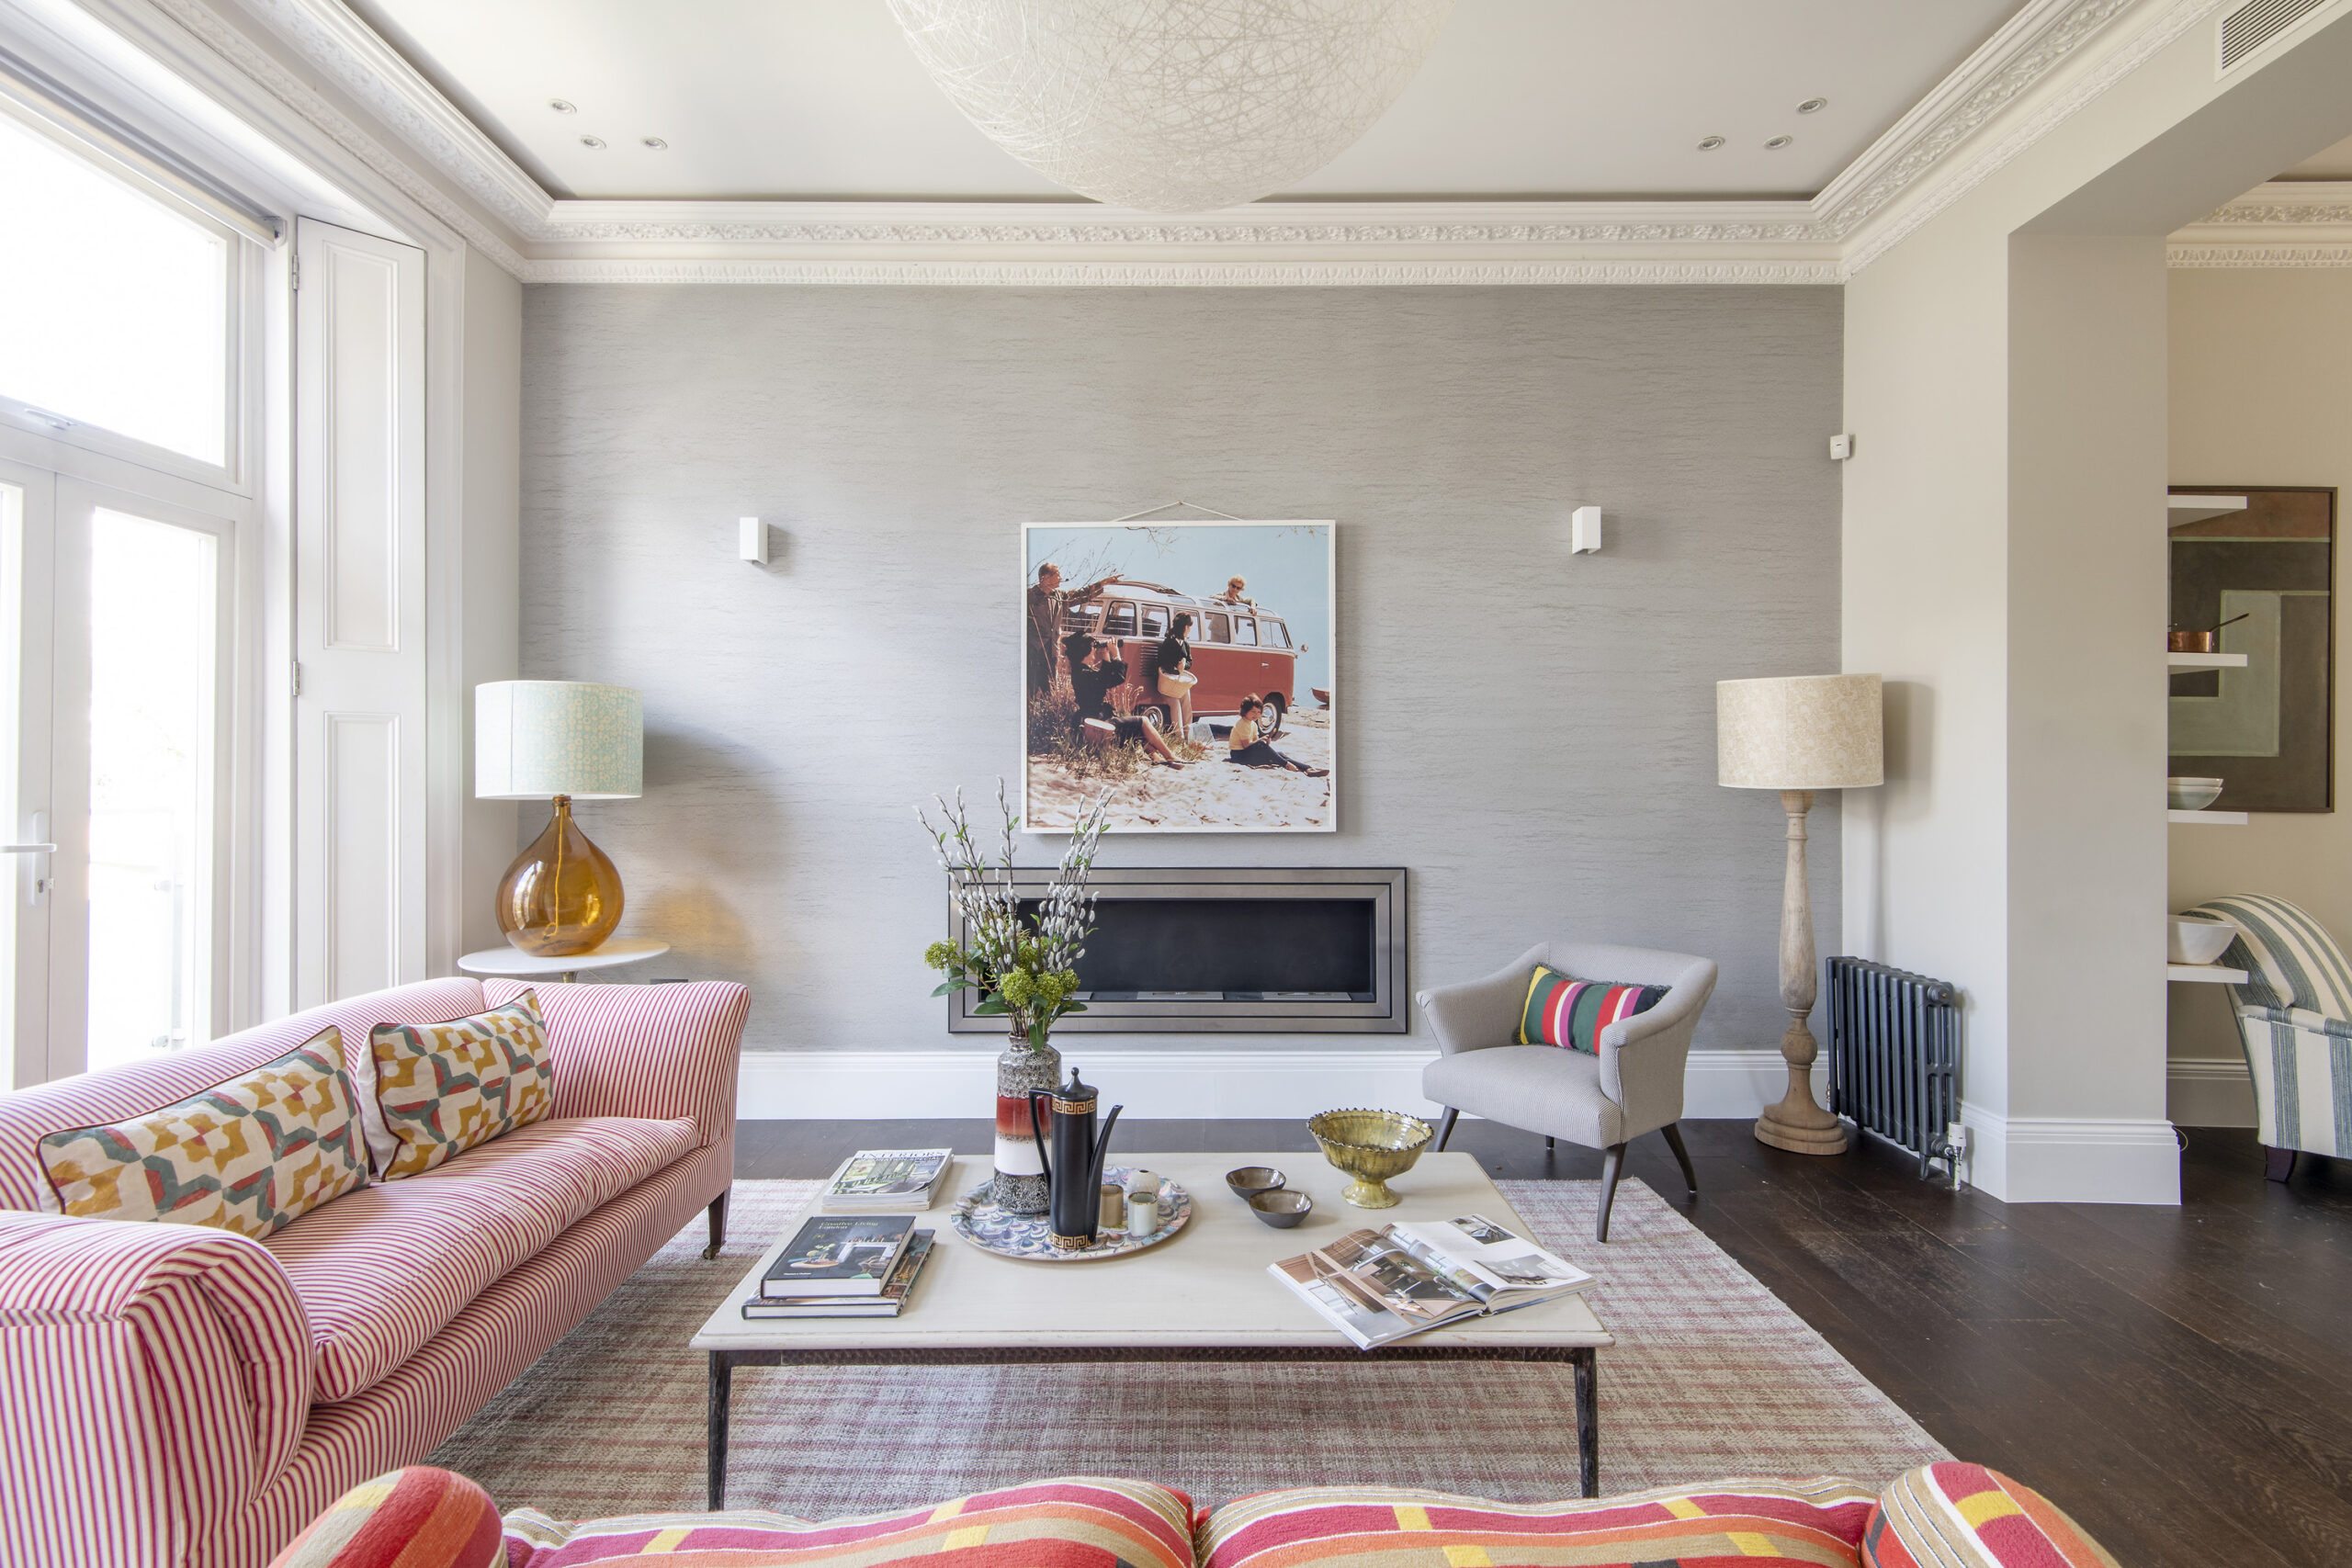 Architect-designed luxury living room of a three-bedroom duplex in Notting Hill